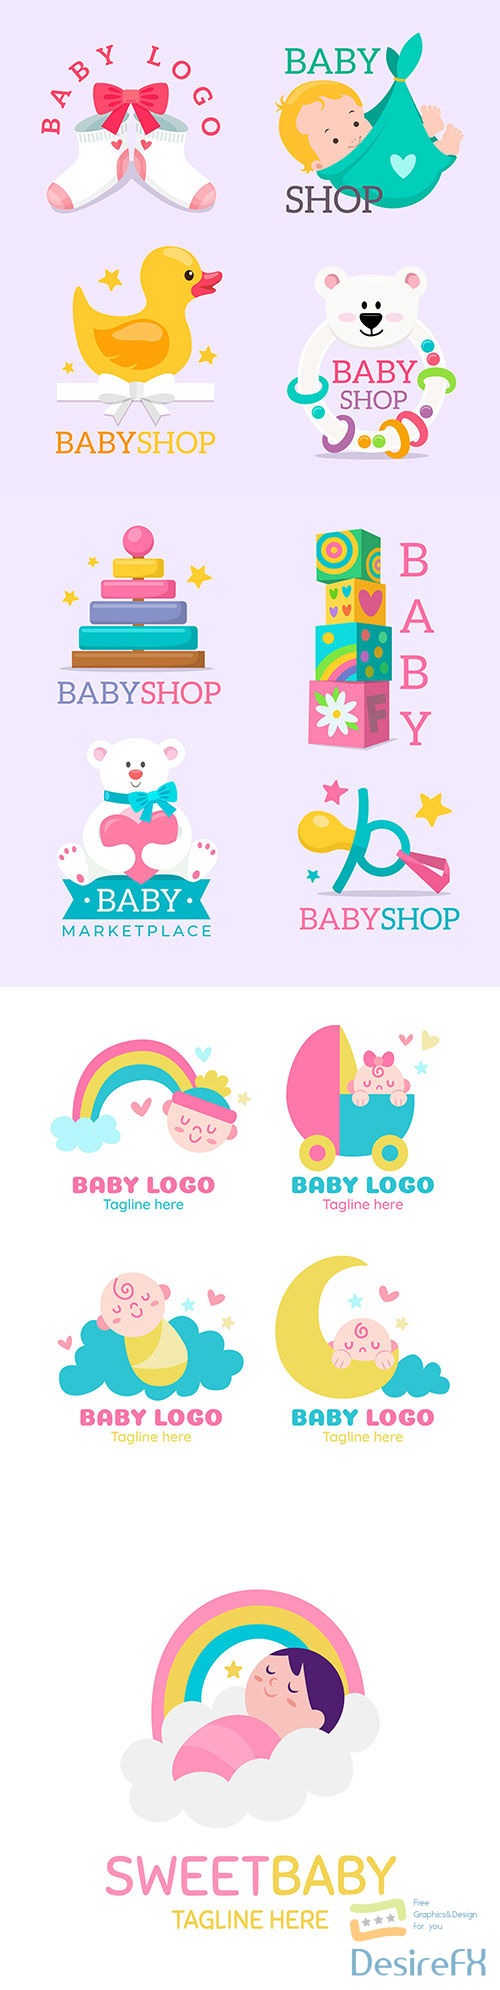 Baby logo collection template